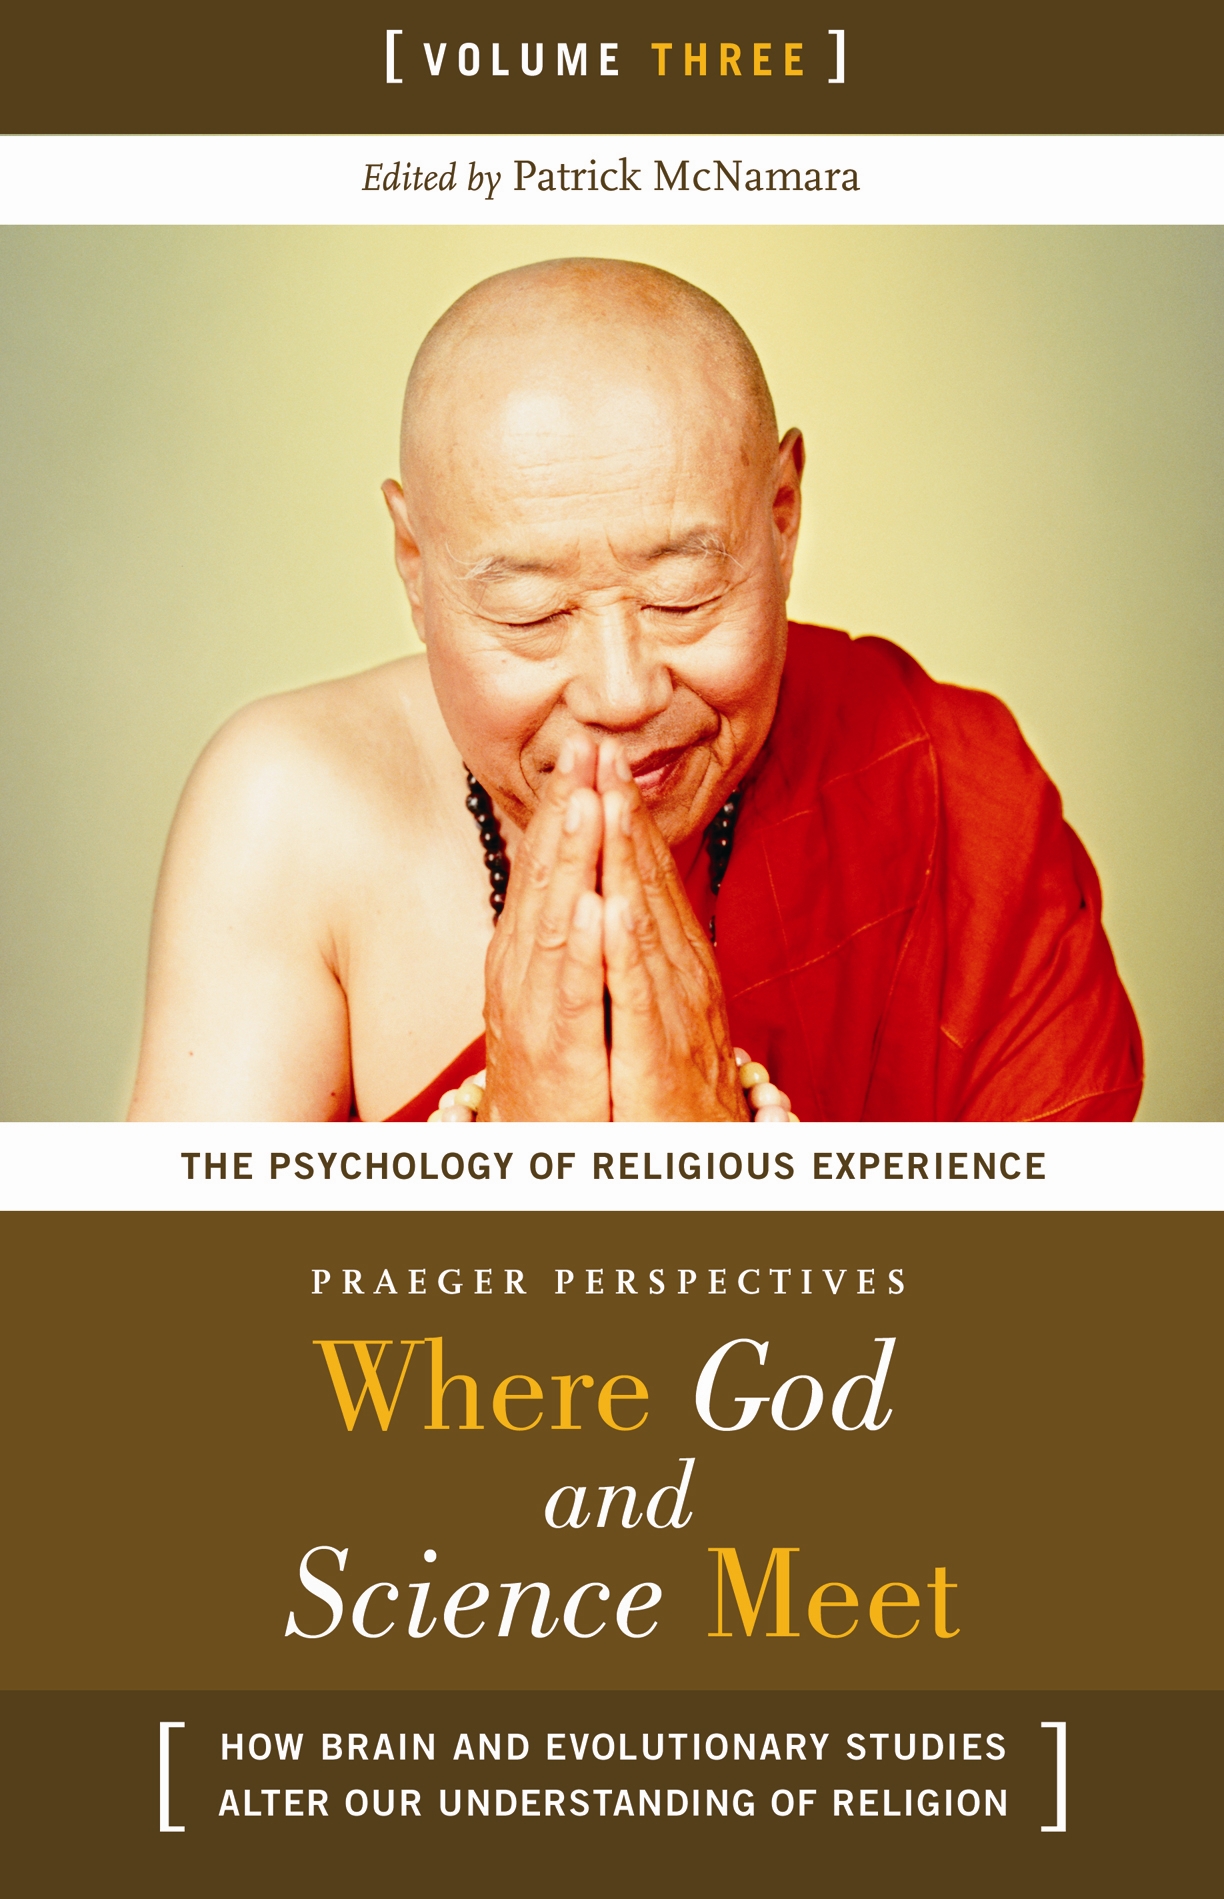 Where God and Science Meet: Volume III: The Psychology of Religious Experience